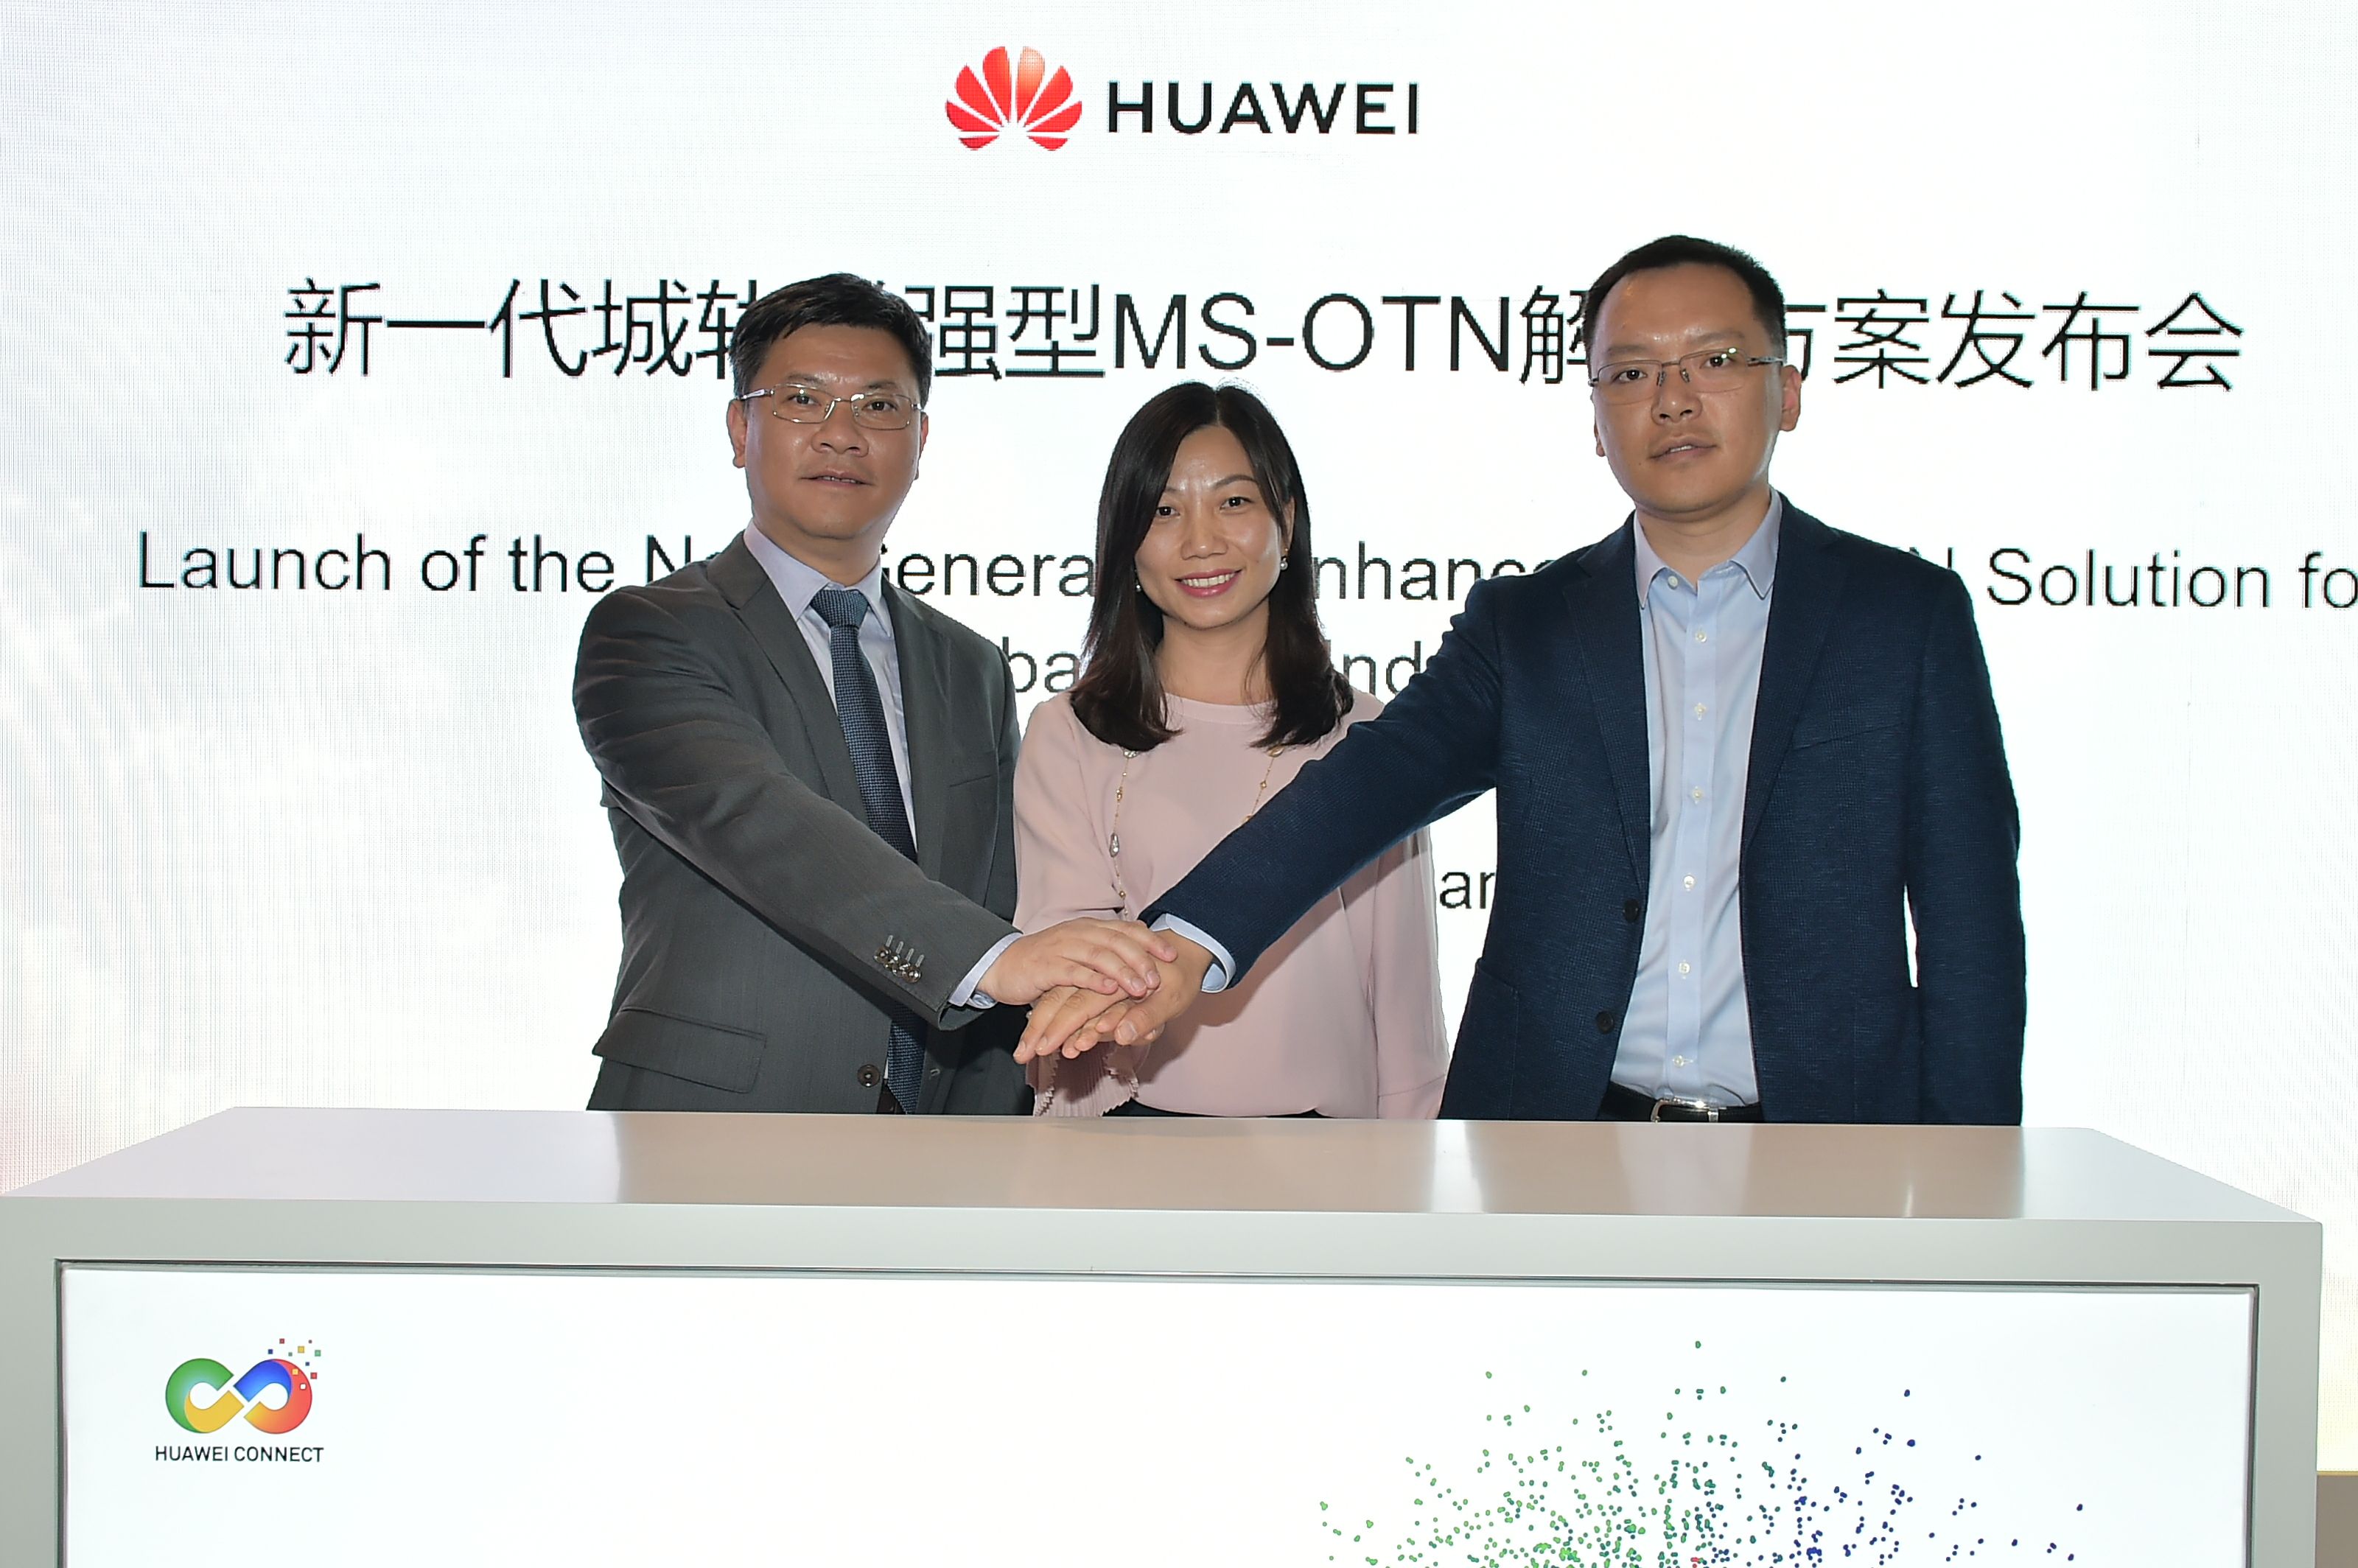 Three Huawei executives stack their hands on top of each other's at the launch of the Smart 100G Enhanced MS-OTN solution